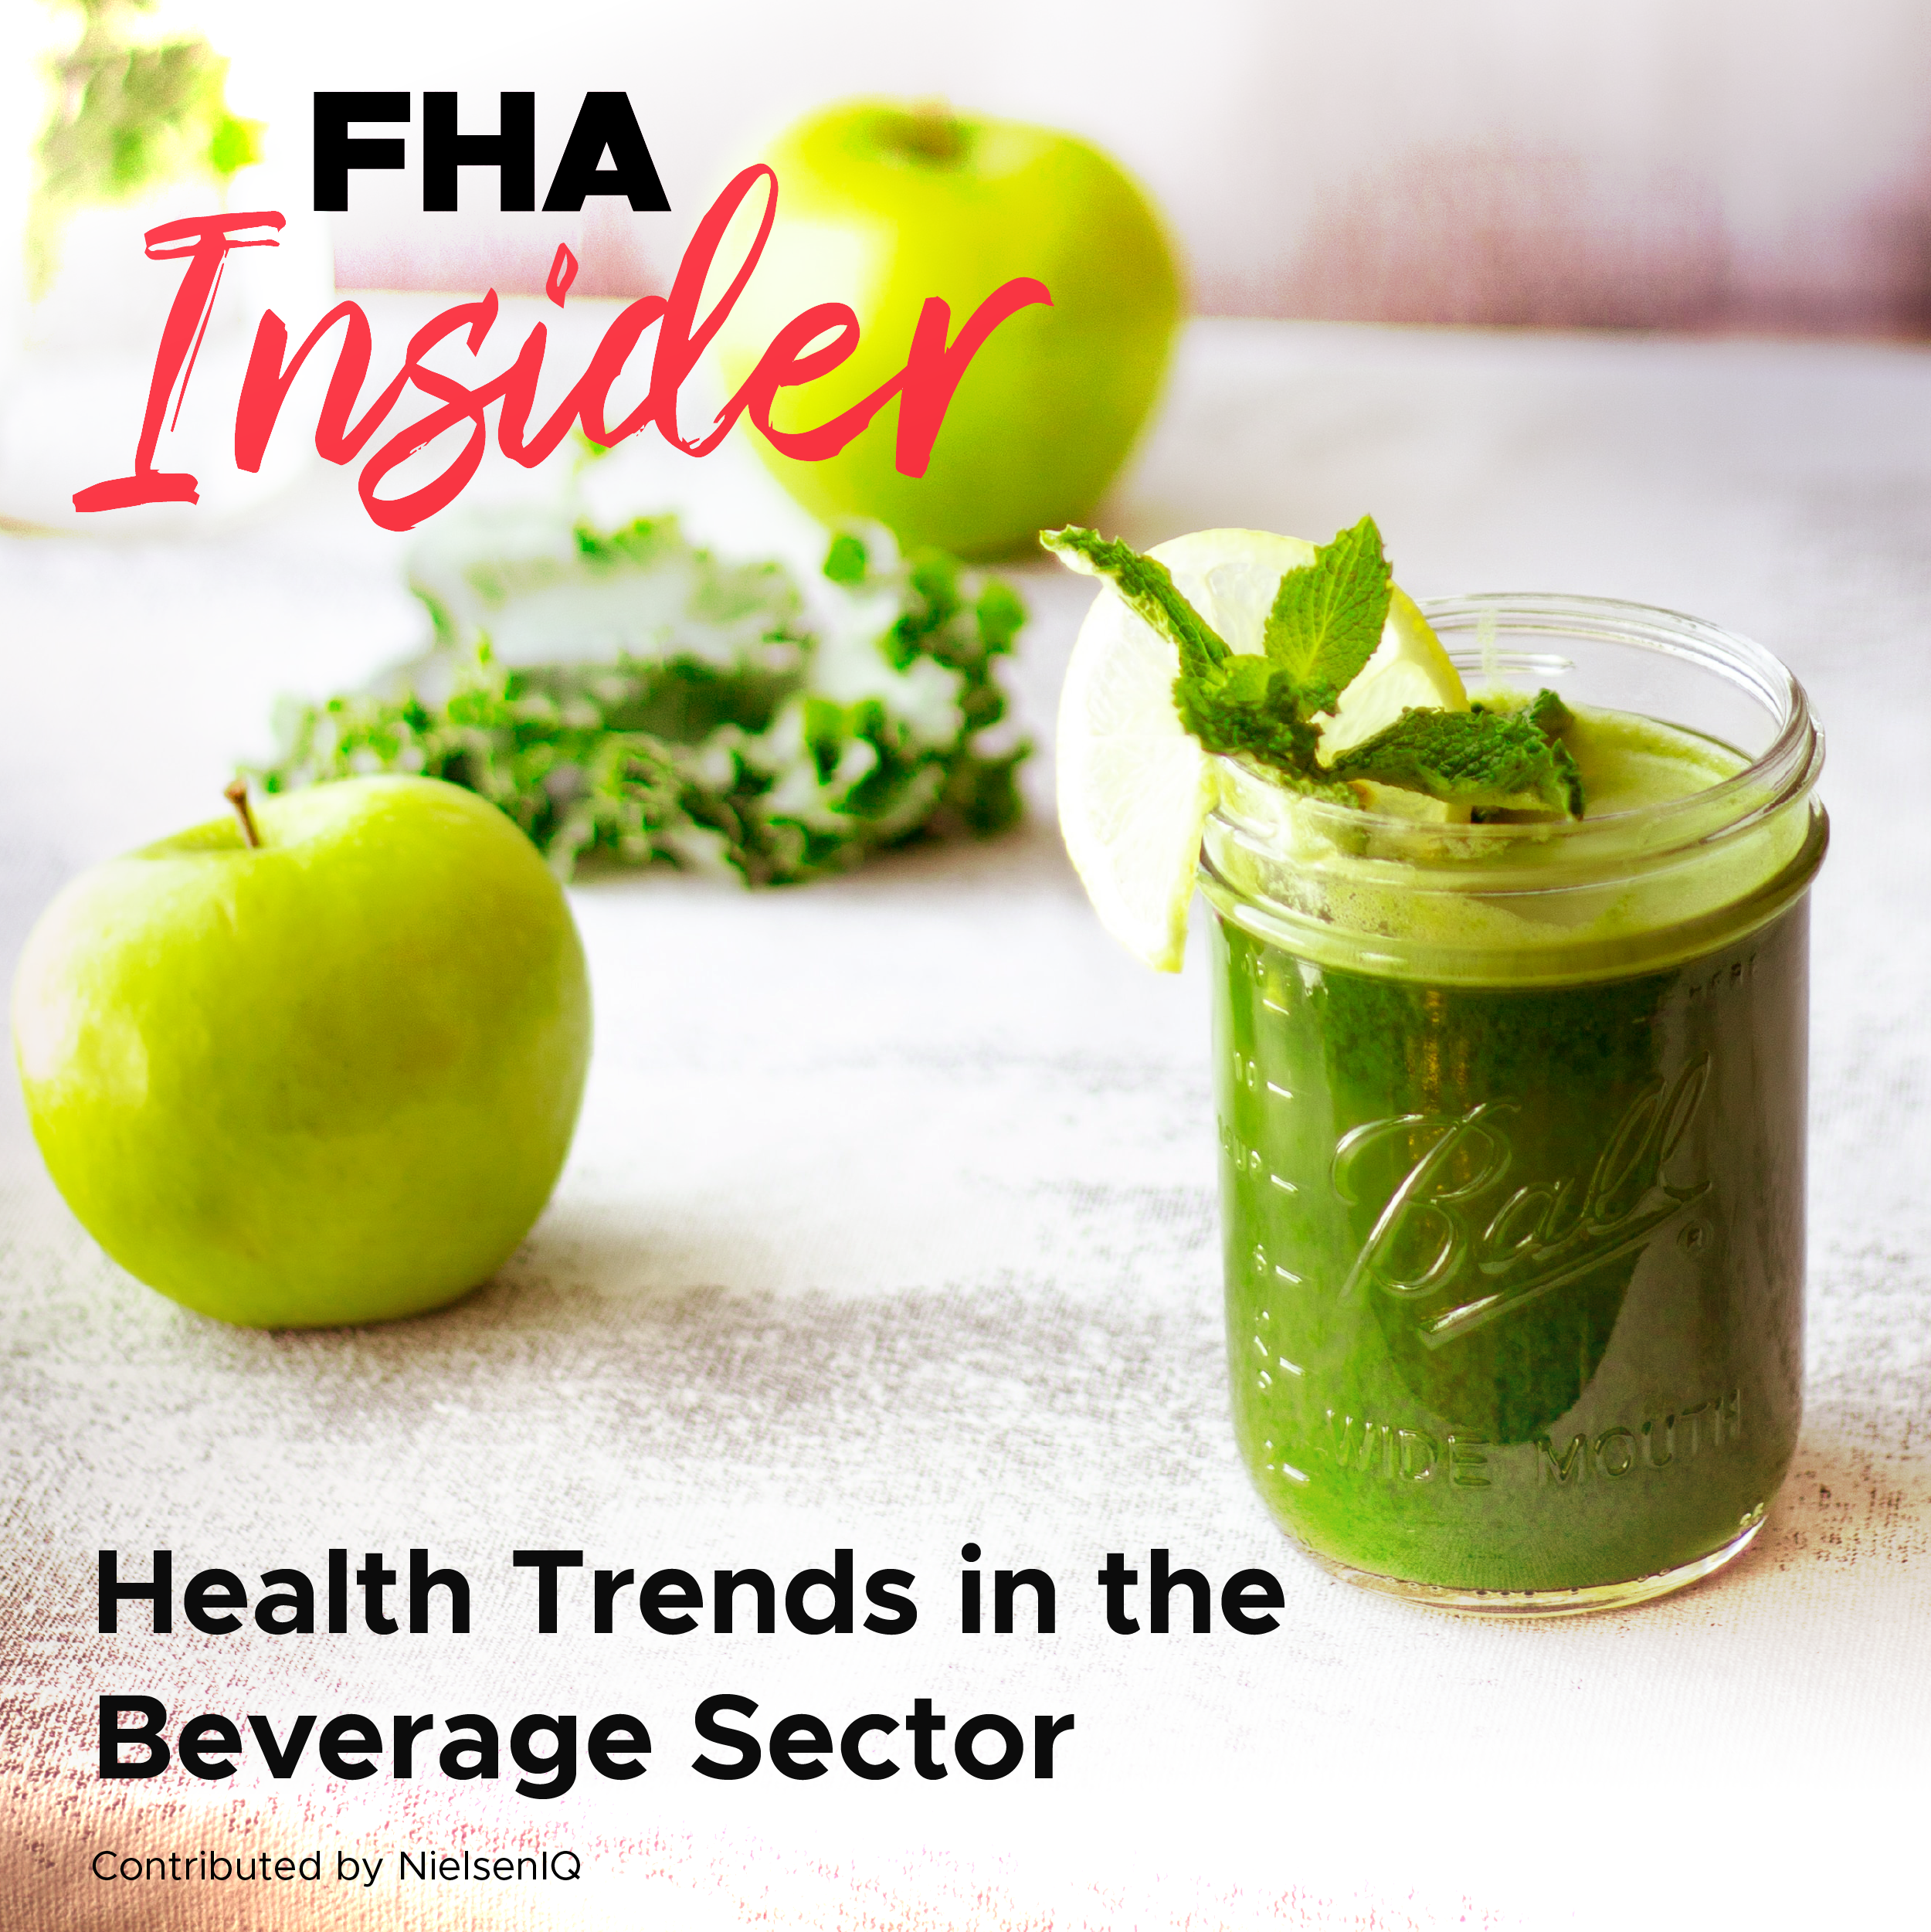 Health Trends in the Beverage Sector